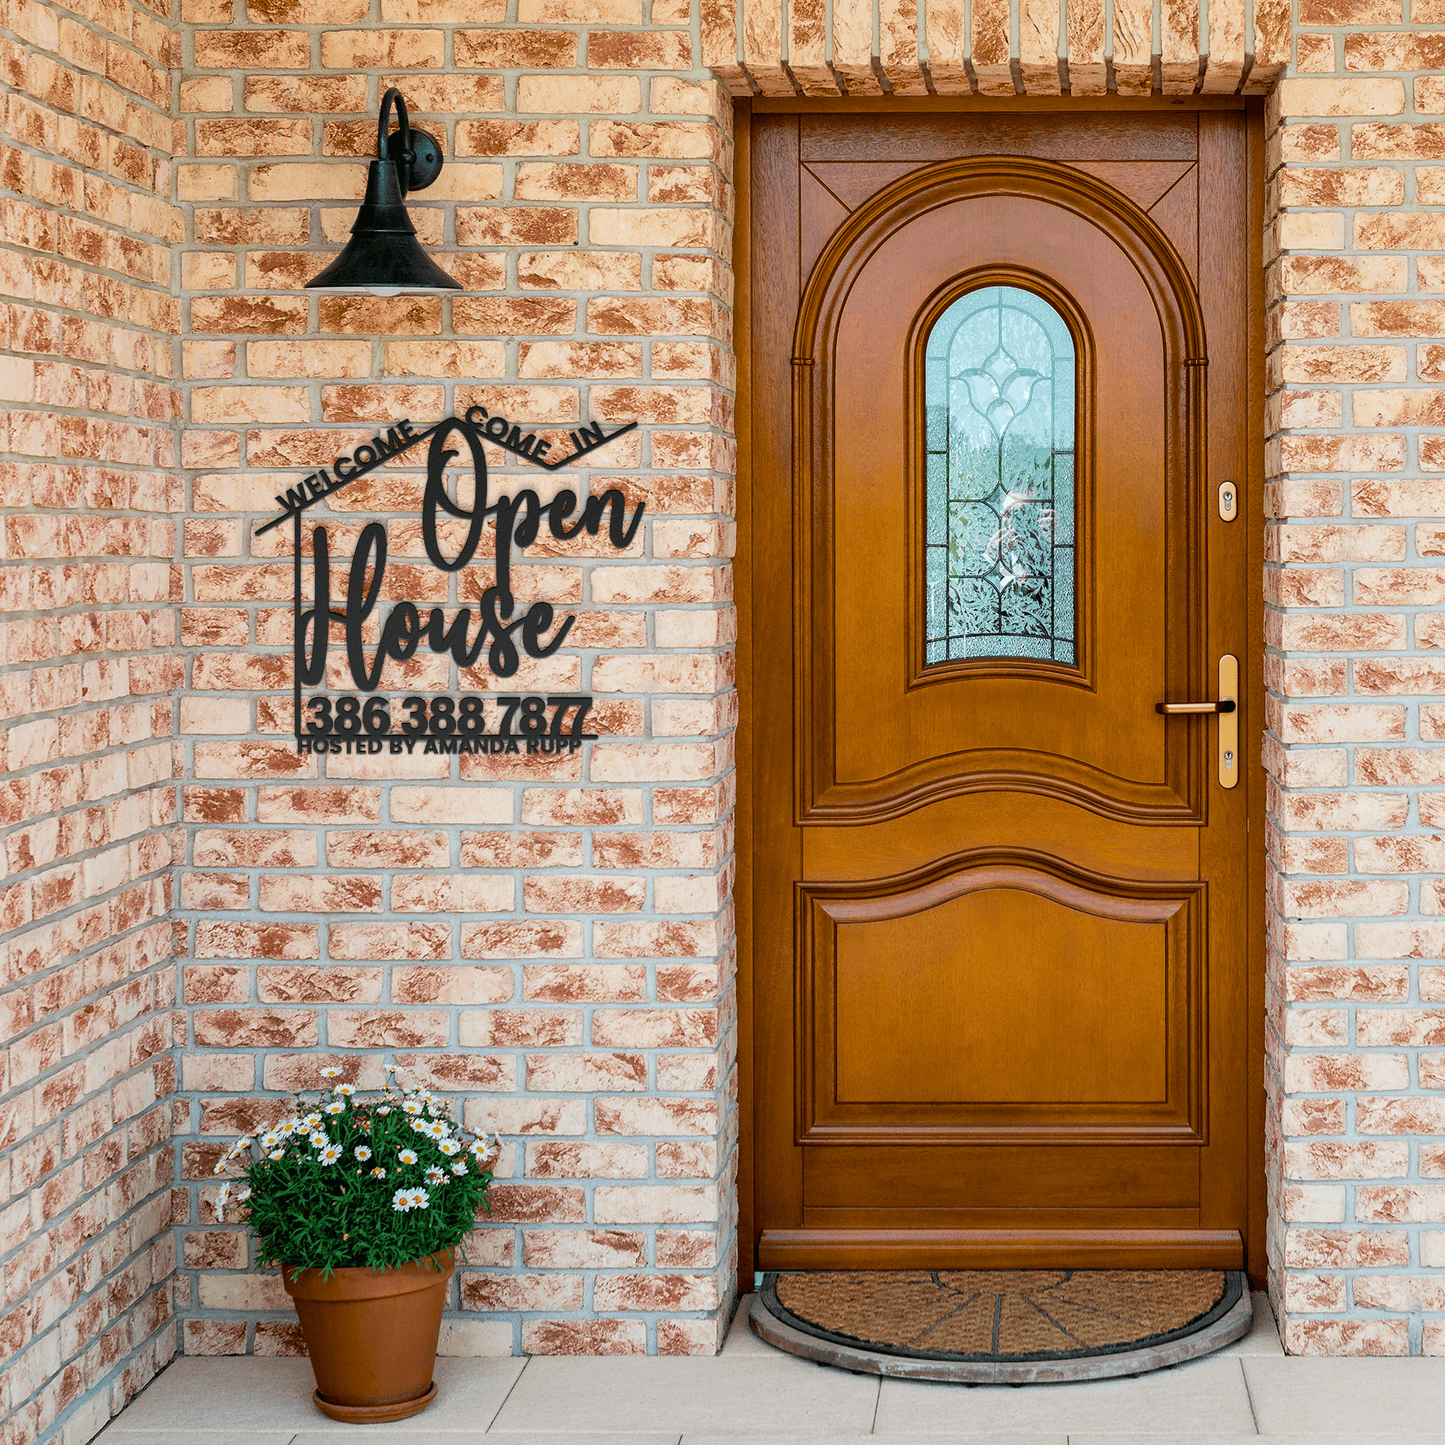 Open House Realtor Welcome Sign Personalized